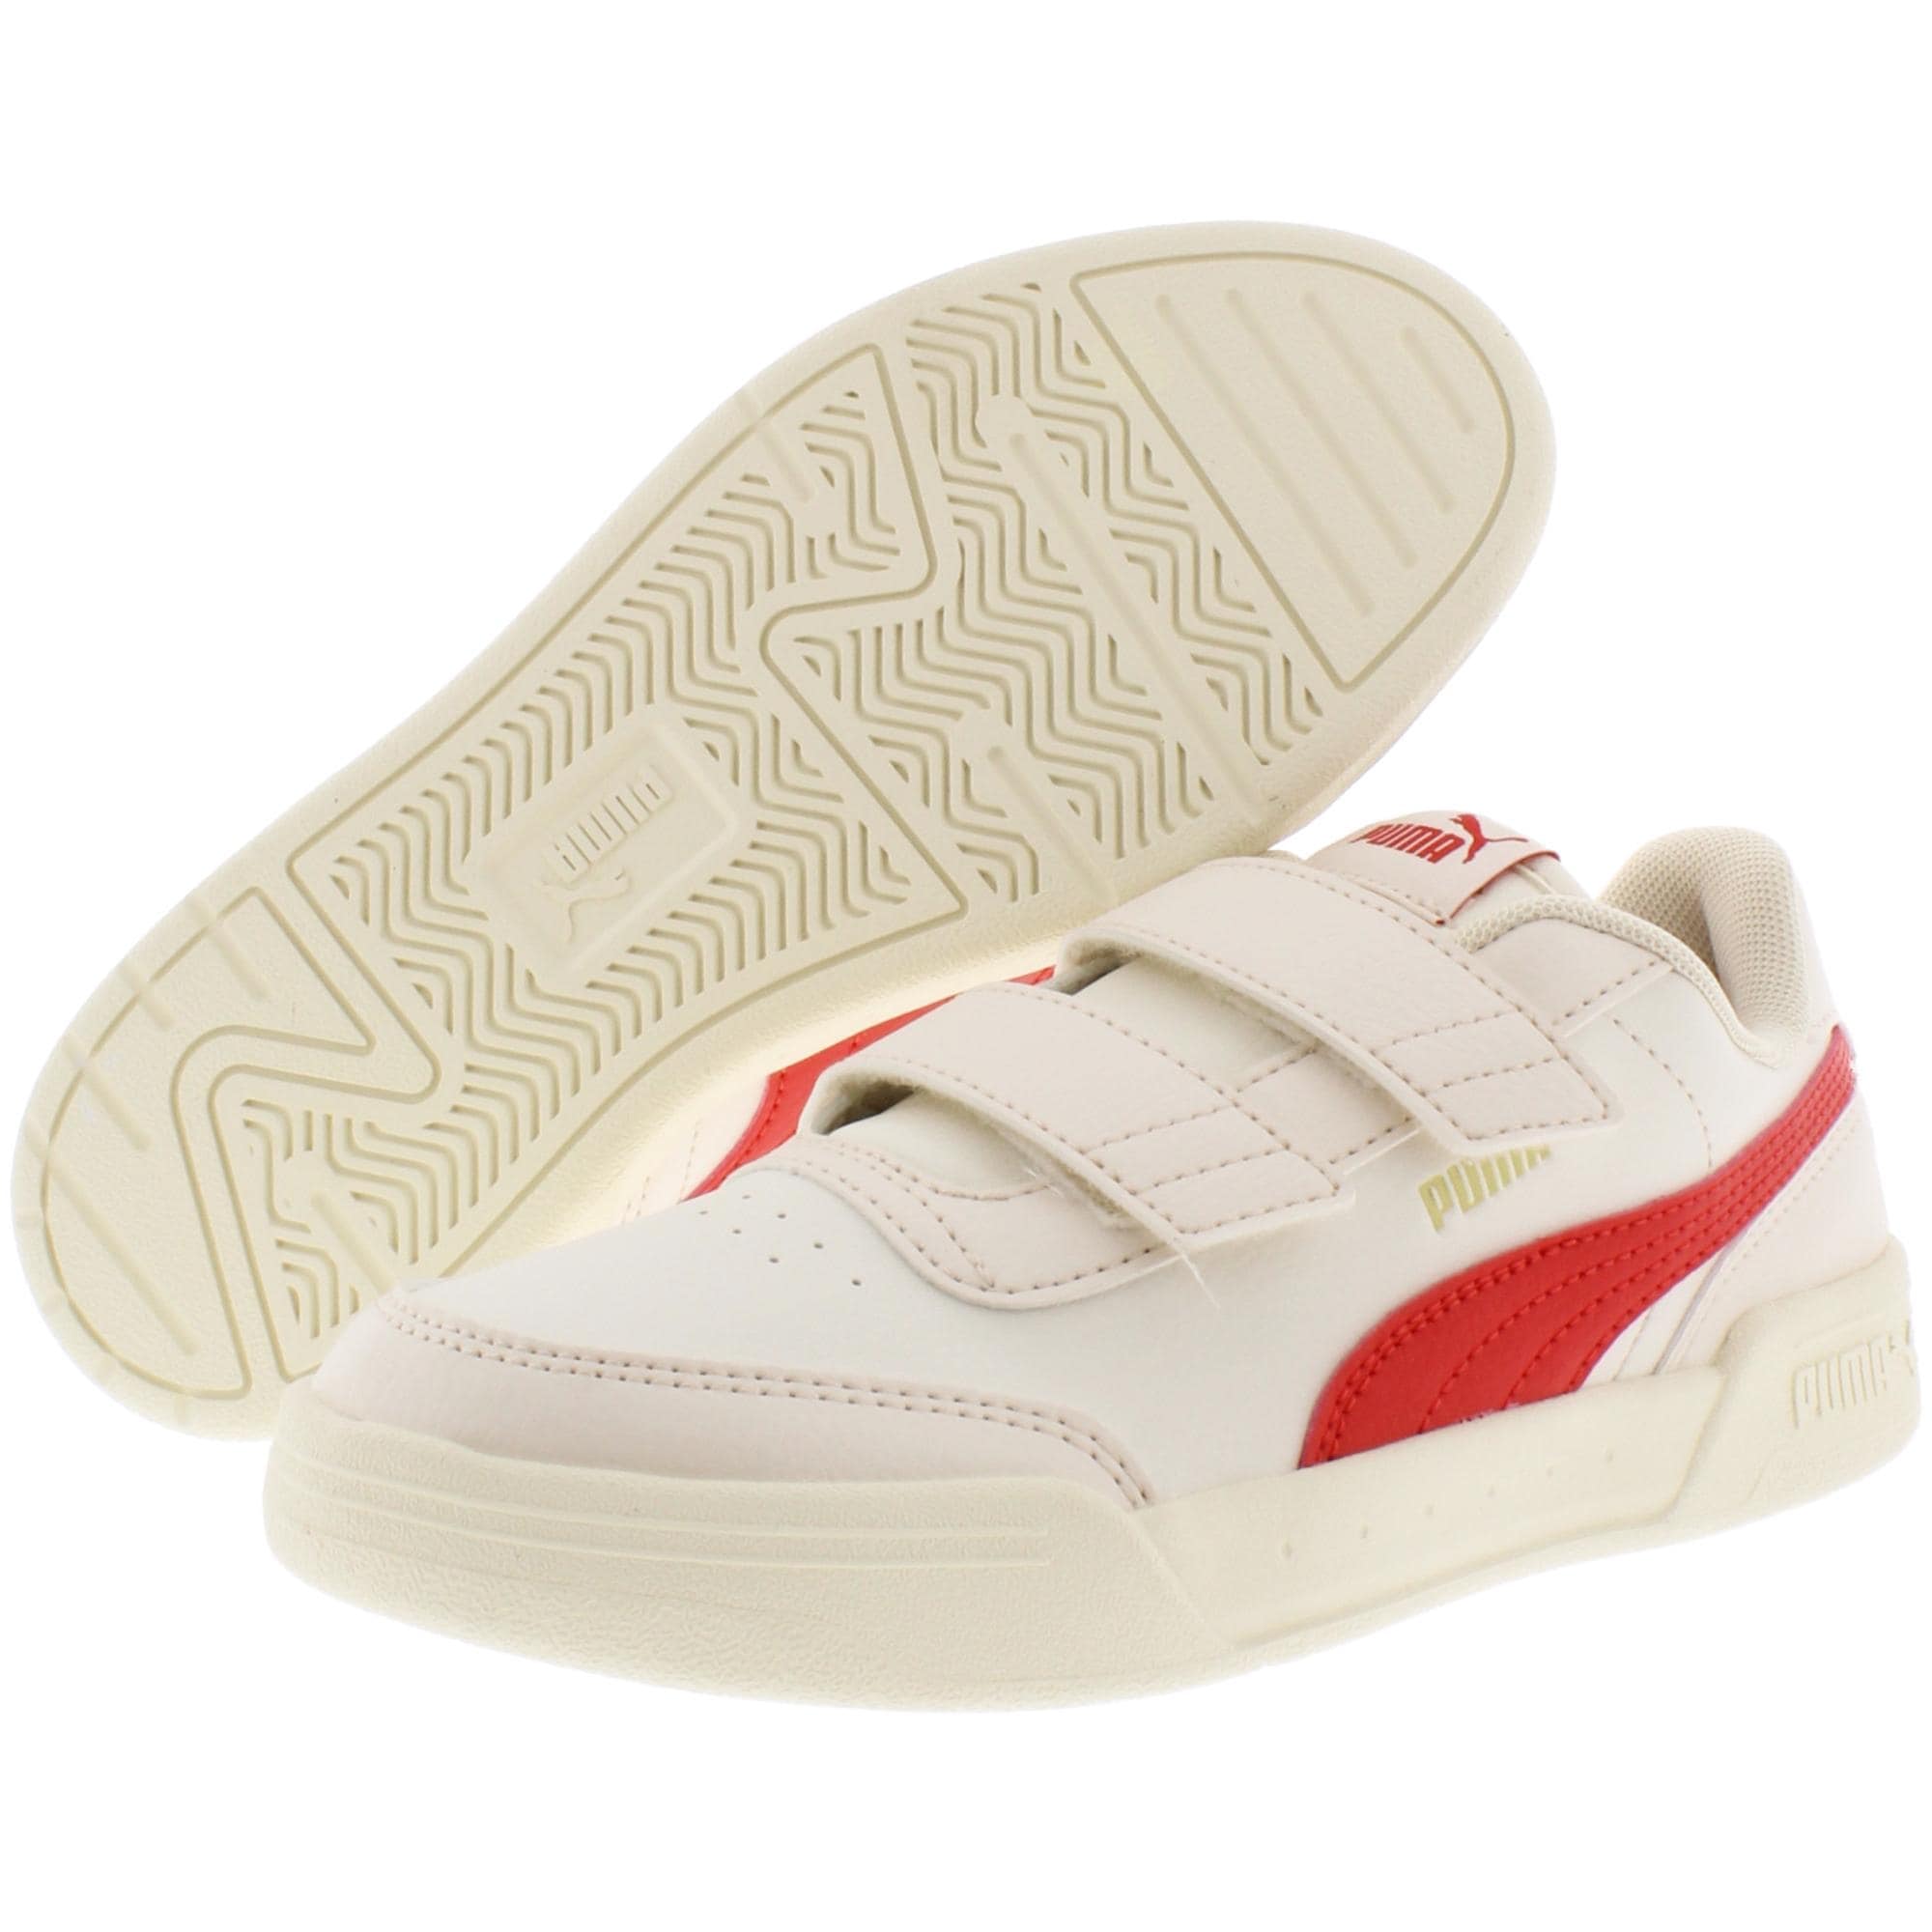 boys leather tennis shoes